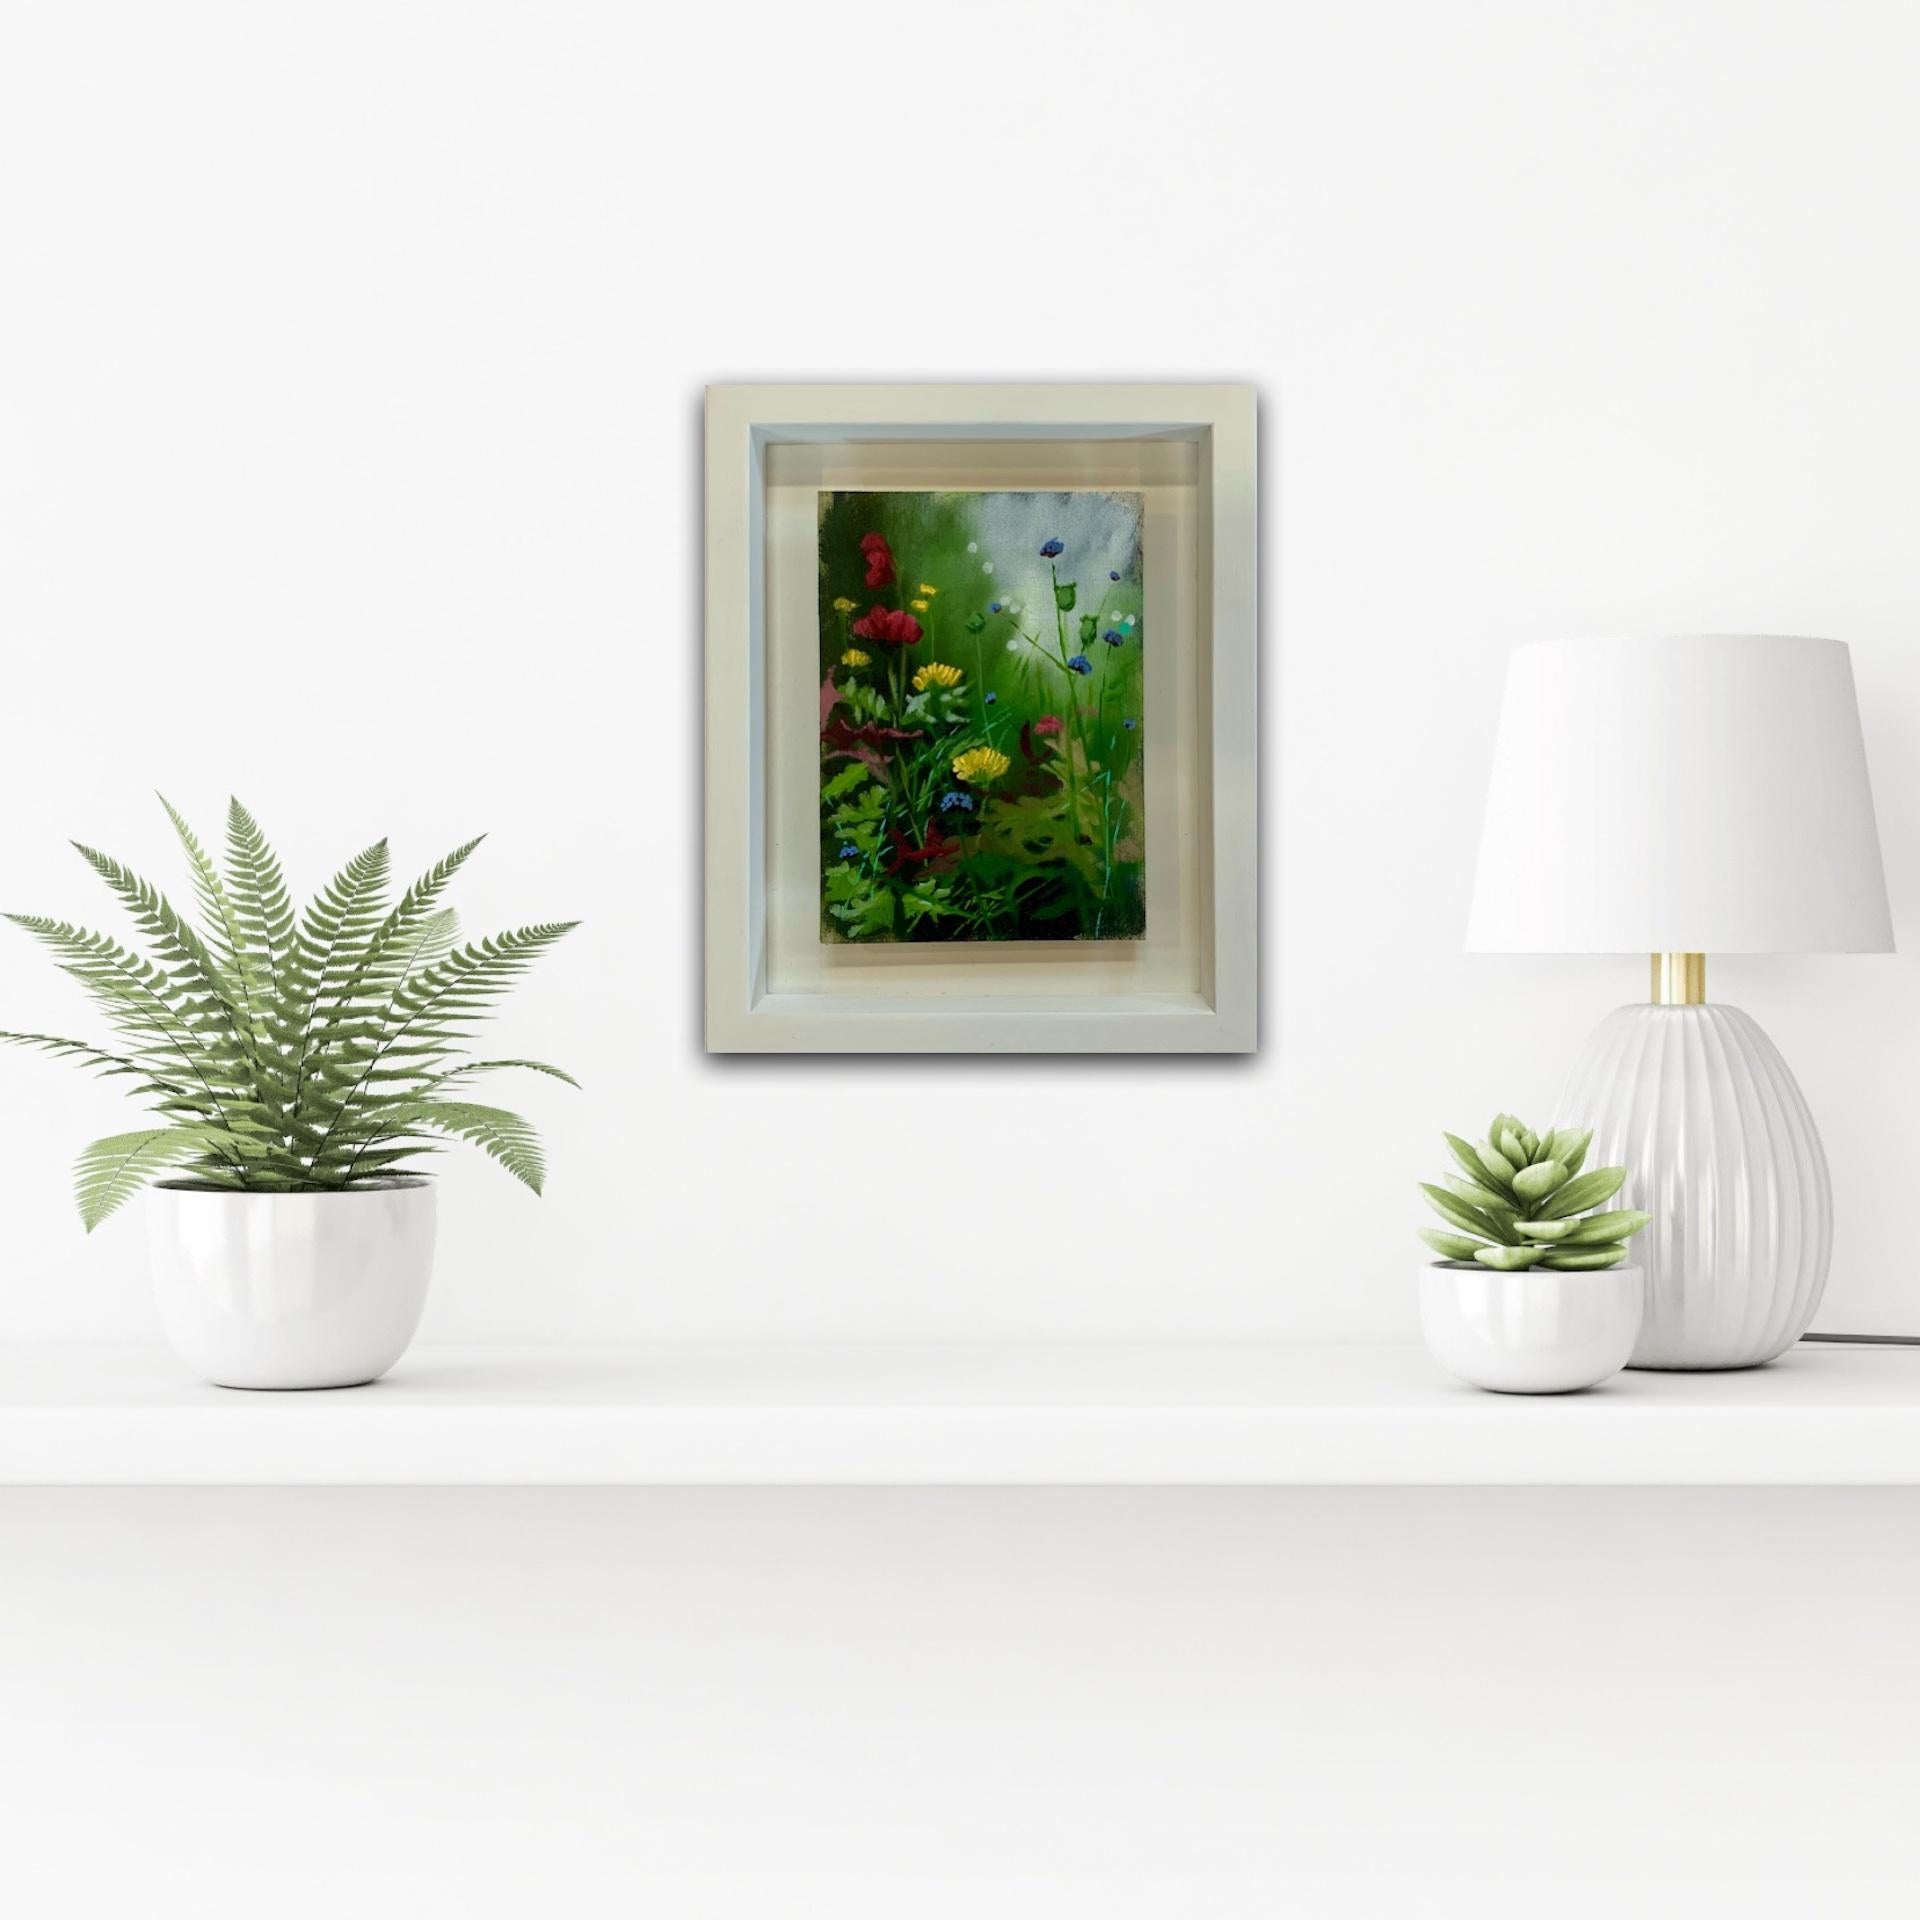 RIVER COTTAGE SERIES (SMALL) - Green Still-Life Painting by Dylan Lloyd